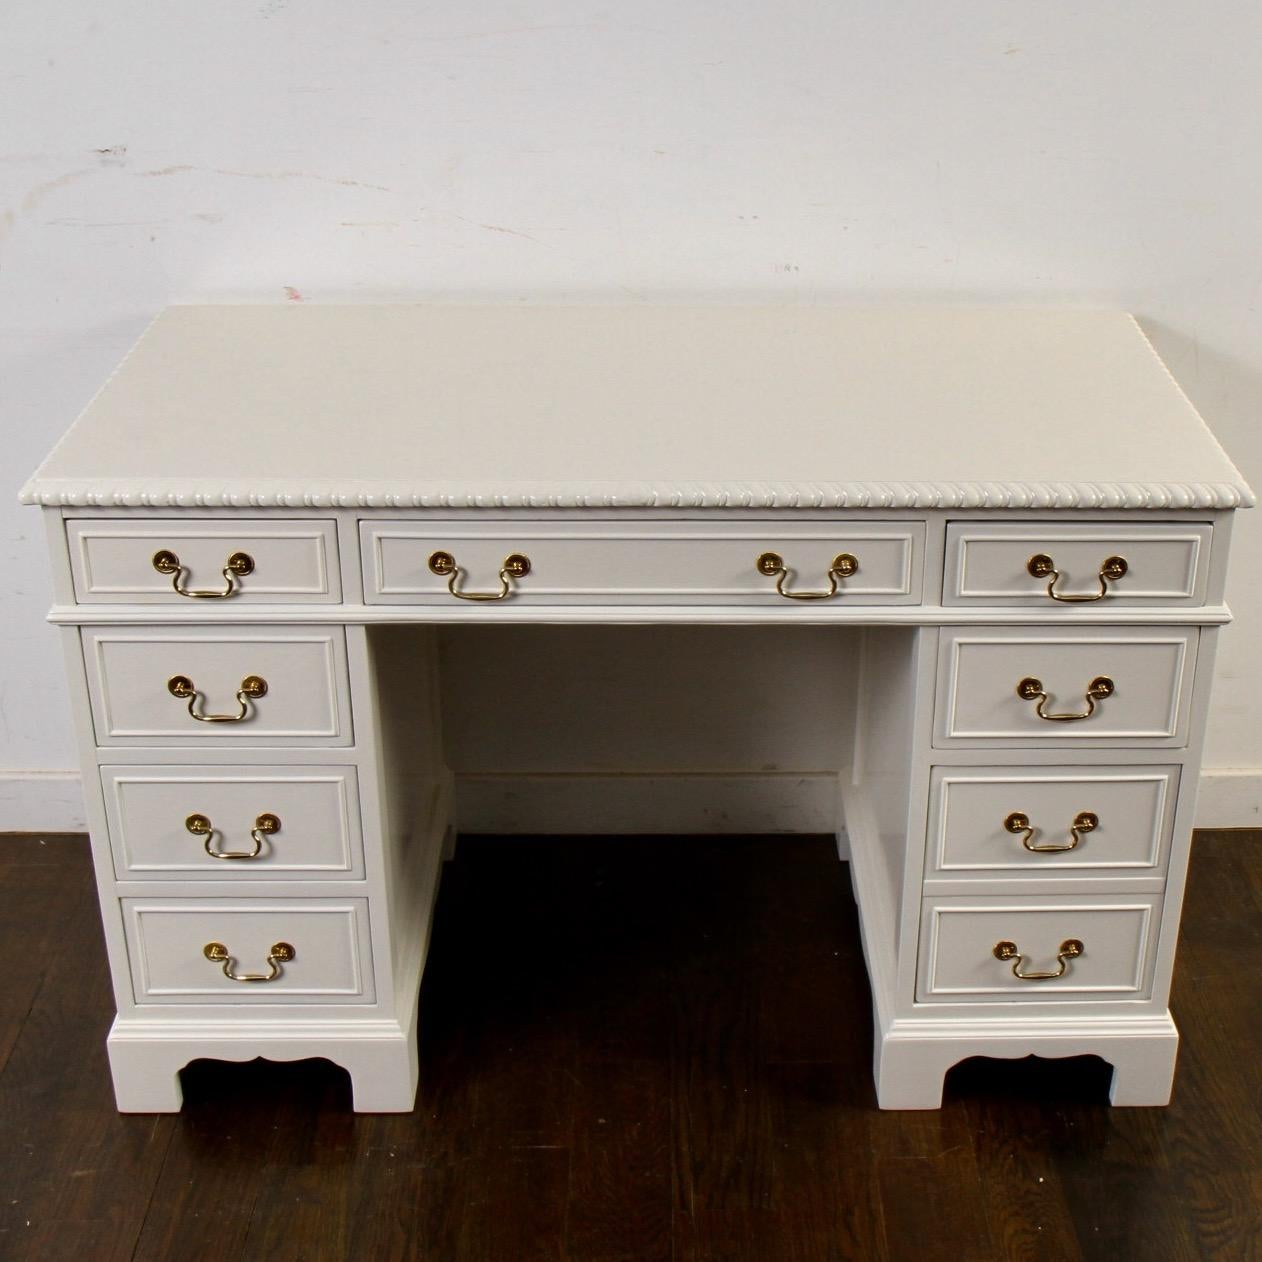 Great size desk for your home office. Originally mahogany, it's been re-invented in white dove lacquer. The middle drawer is stamped by American Table Company, “Taylor Made” Furniture, Jamestown, N.Y. The American Table Co. made fine furniture from